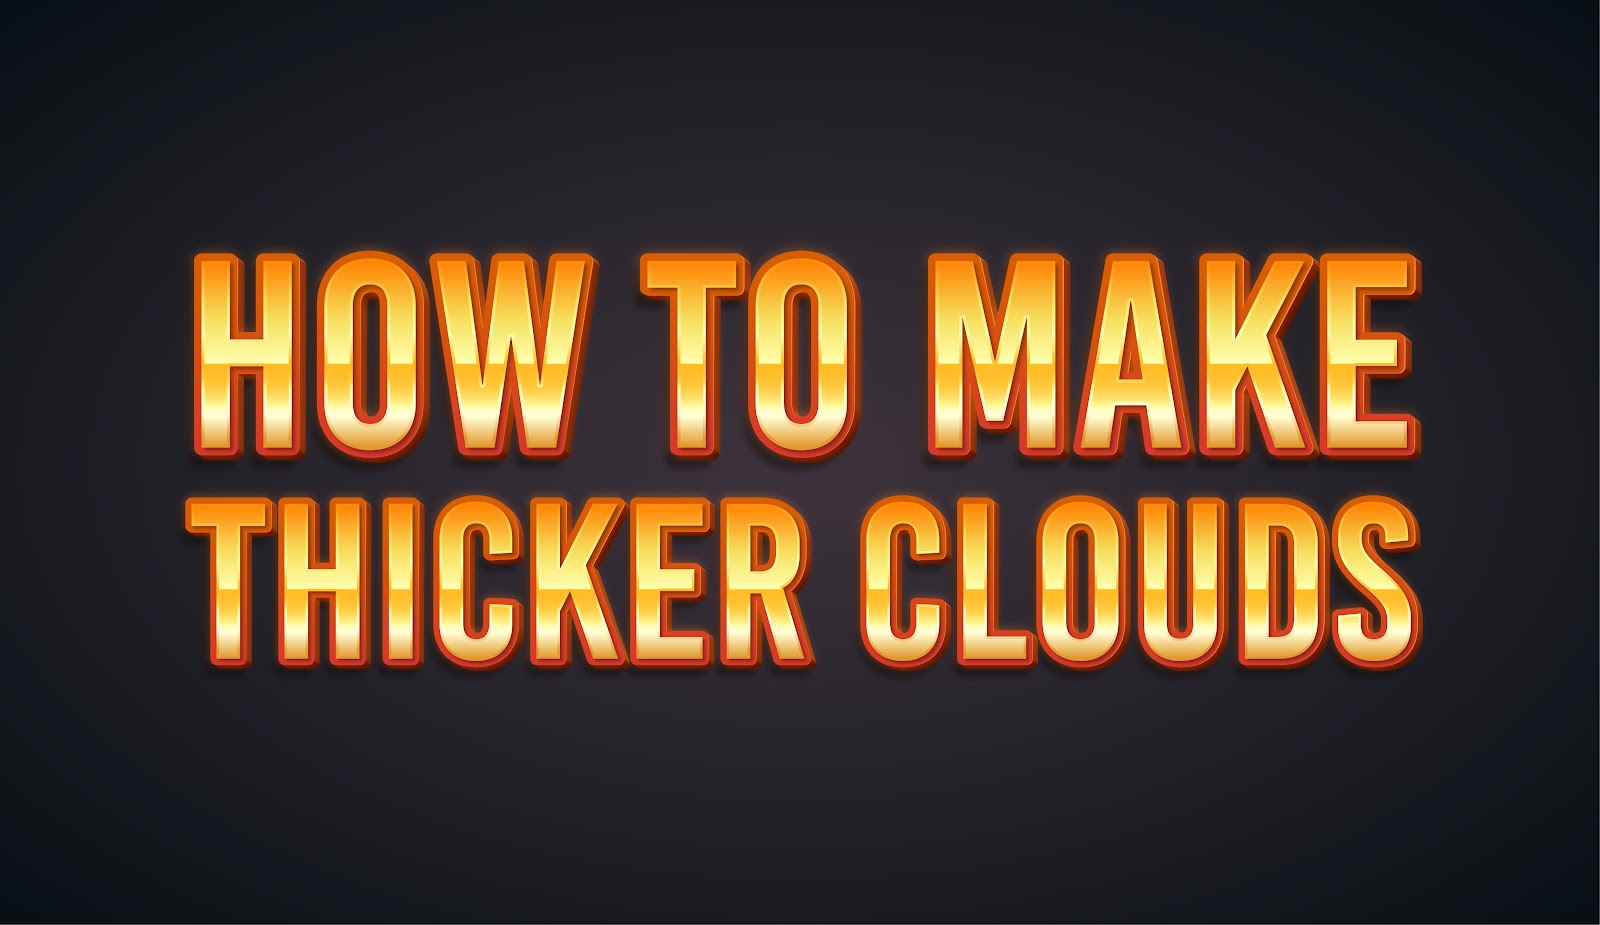 How To Make Thicker Clouds